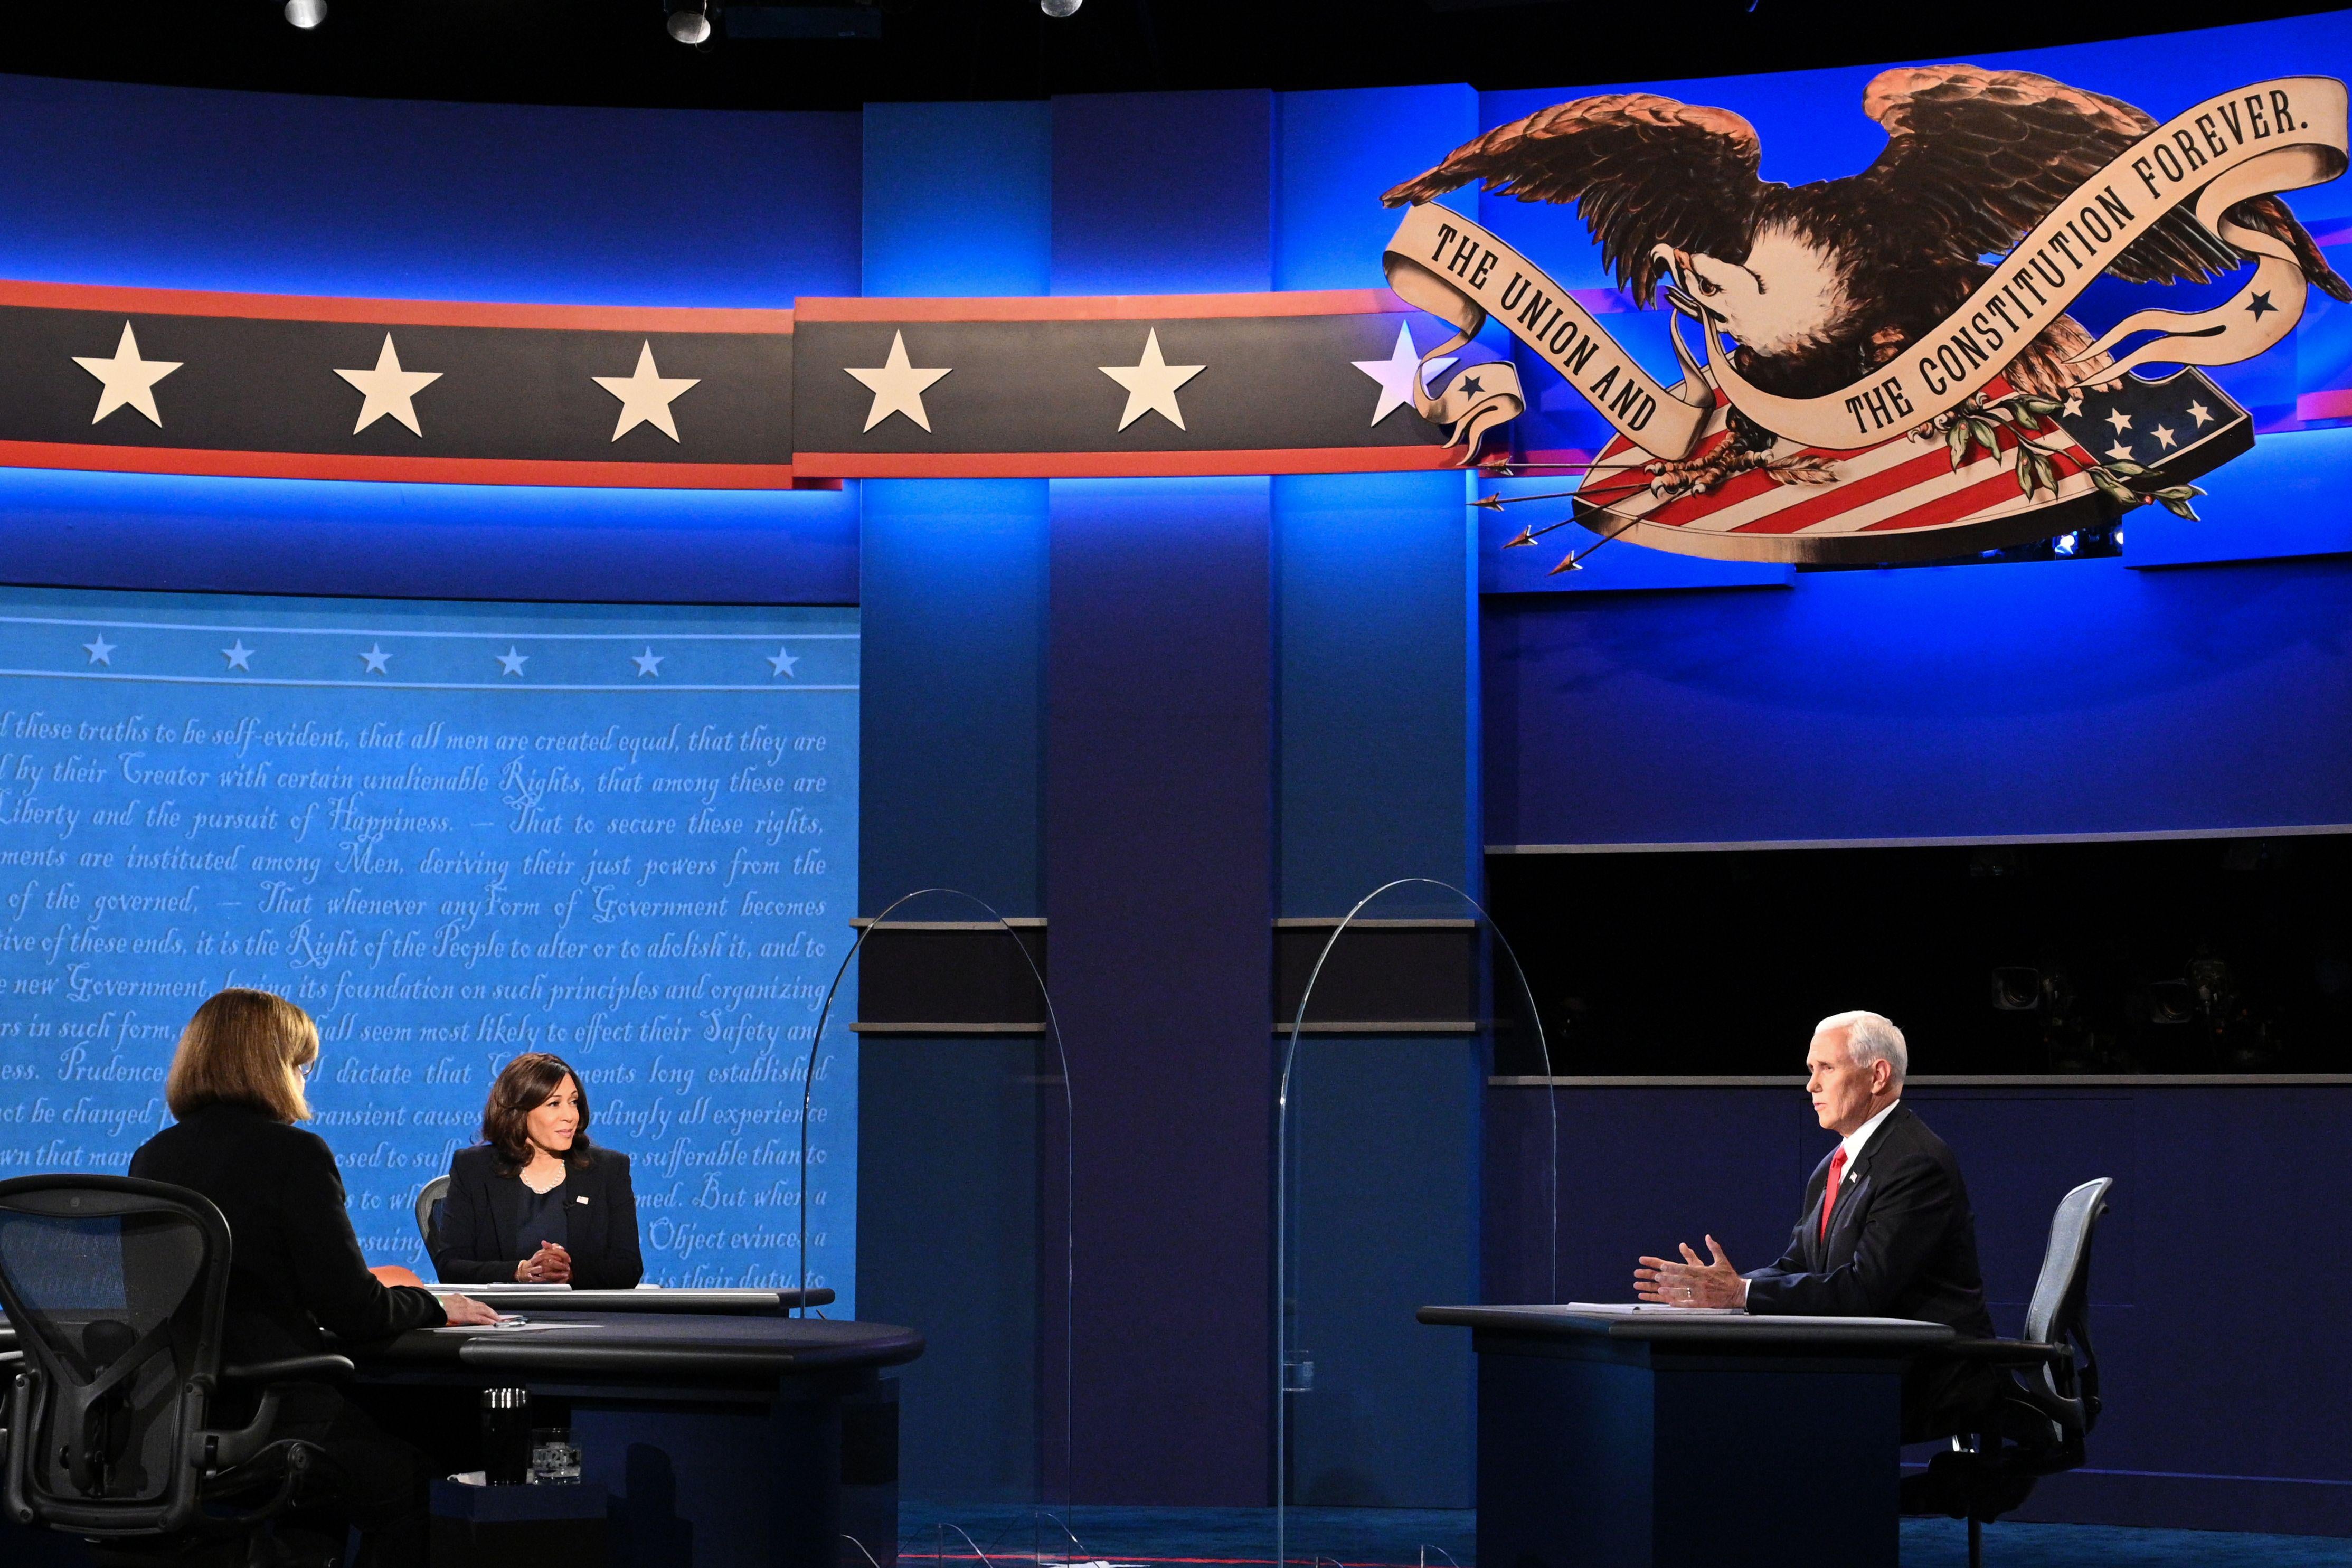 Harris and Pence are seen separated by glass onstage, with Susan Page watching.